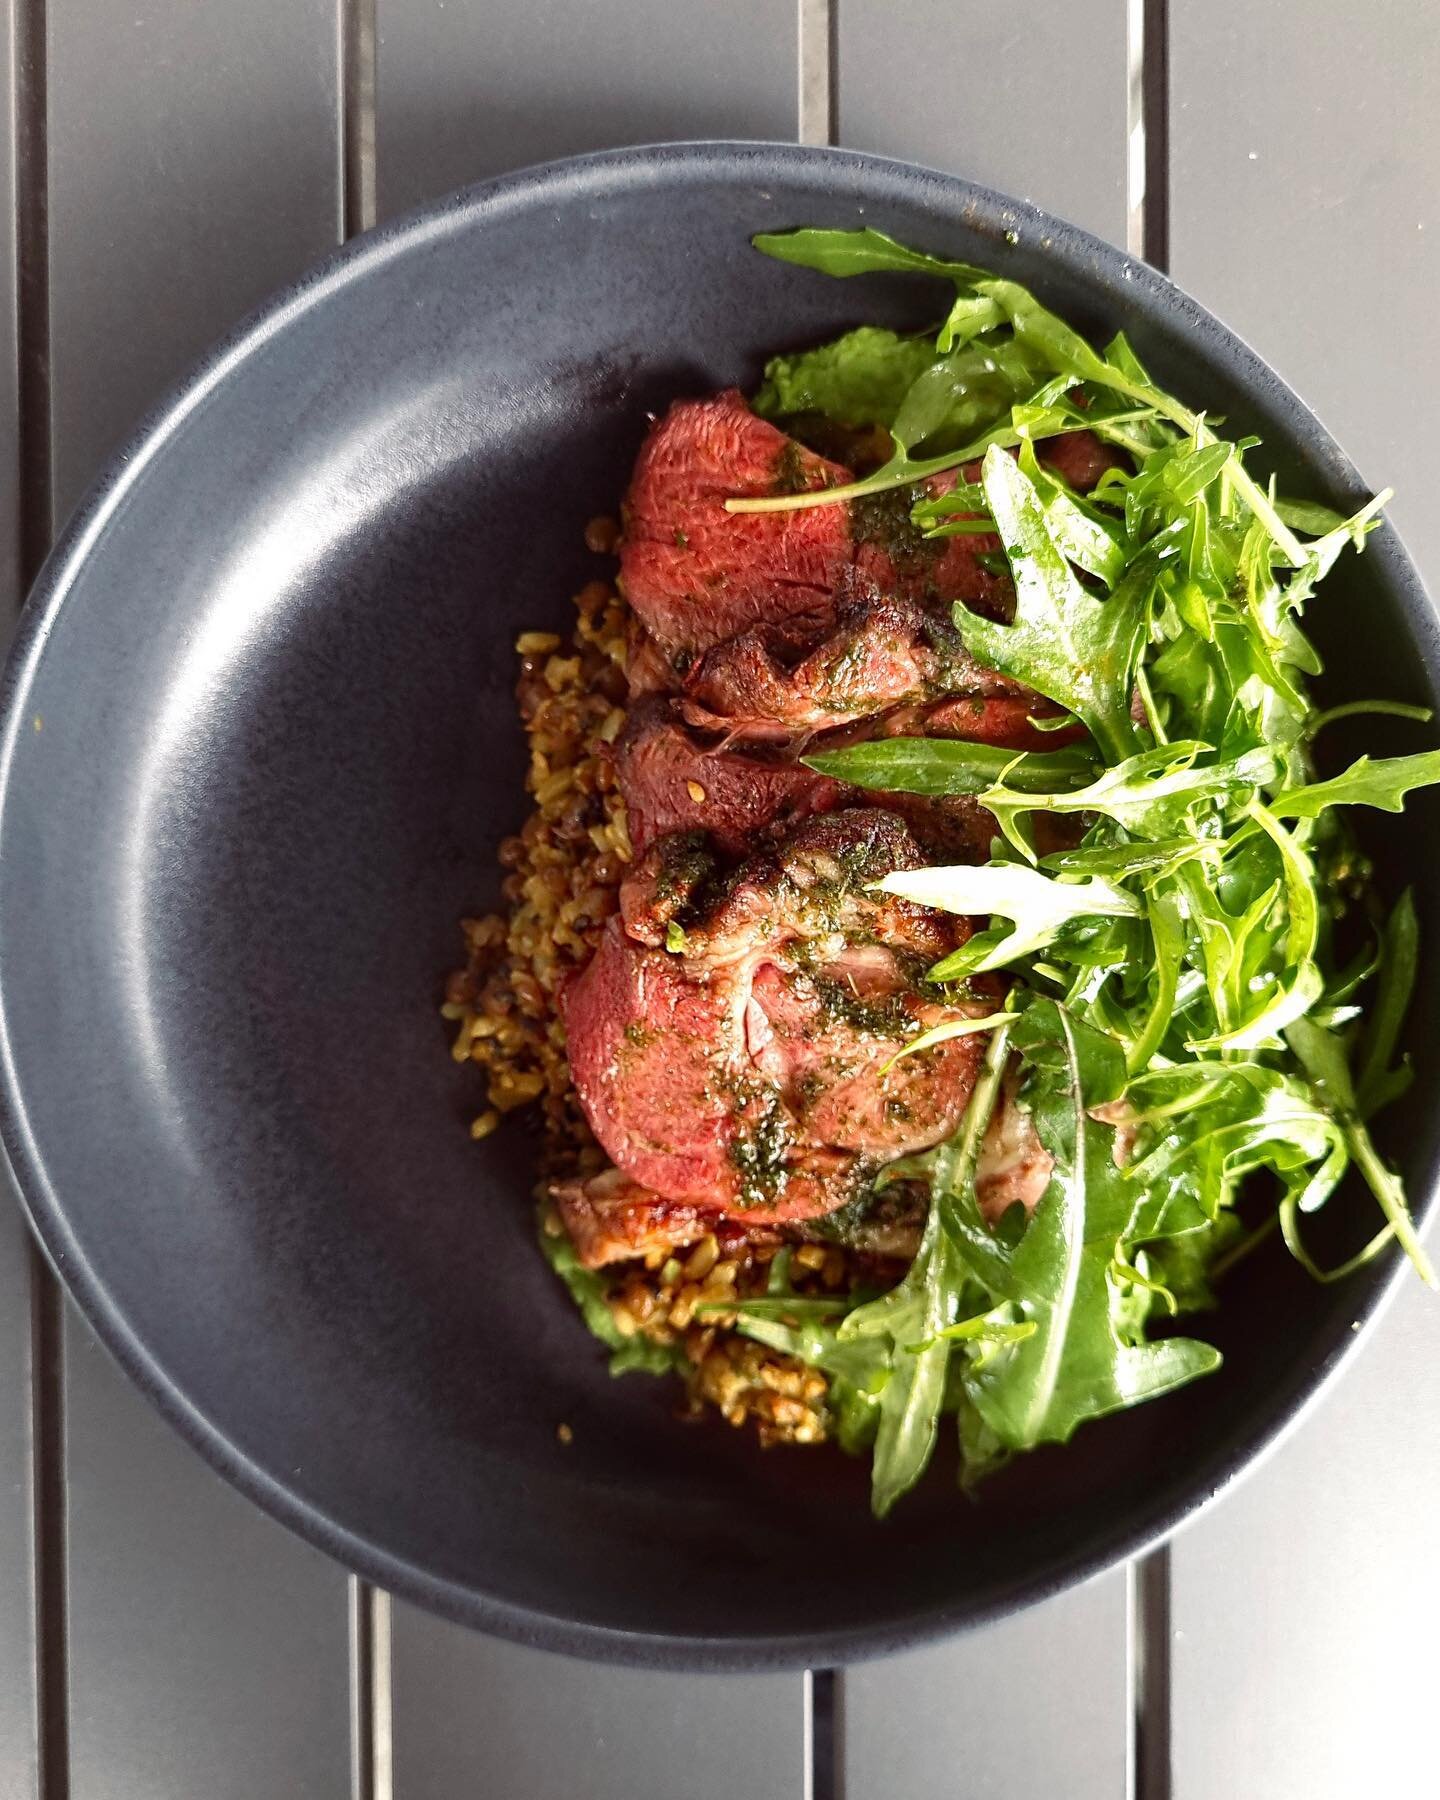 This week&rsquo;s special 🙌🏼🙌🏼
Roasted Lamb with Spiced Lentils &amp; Grain Salad. Pea Puree and Rocket with Yuzu